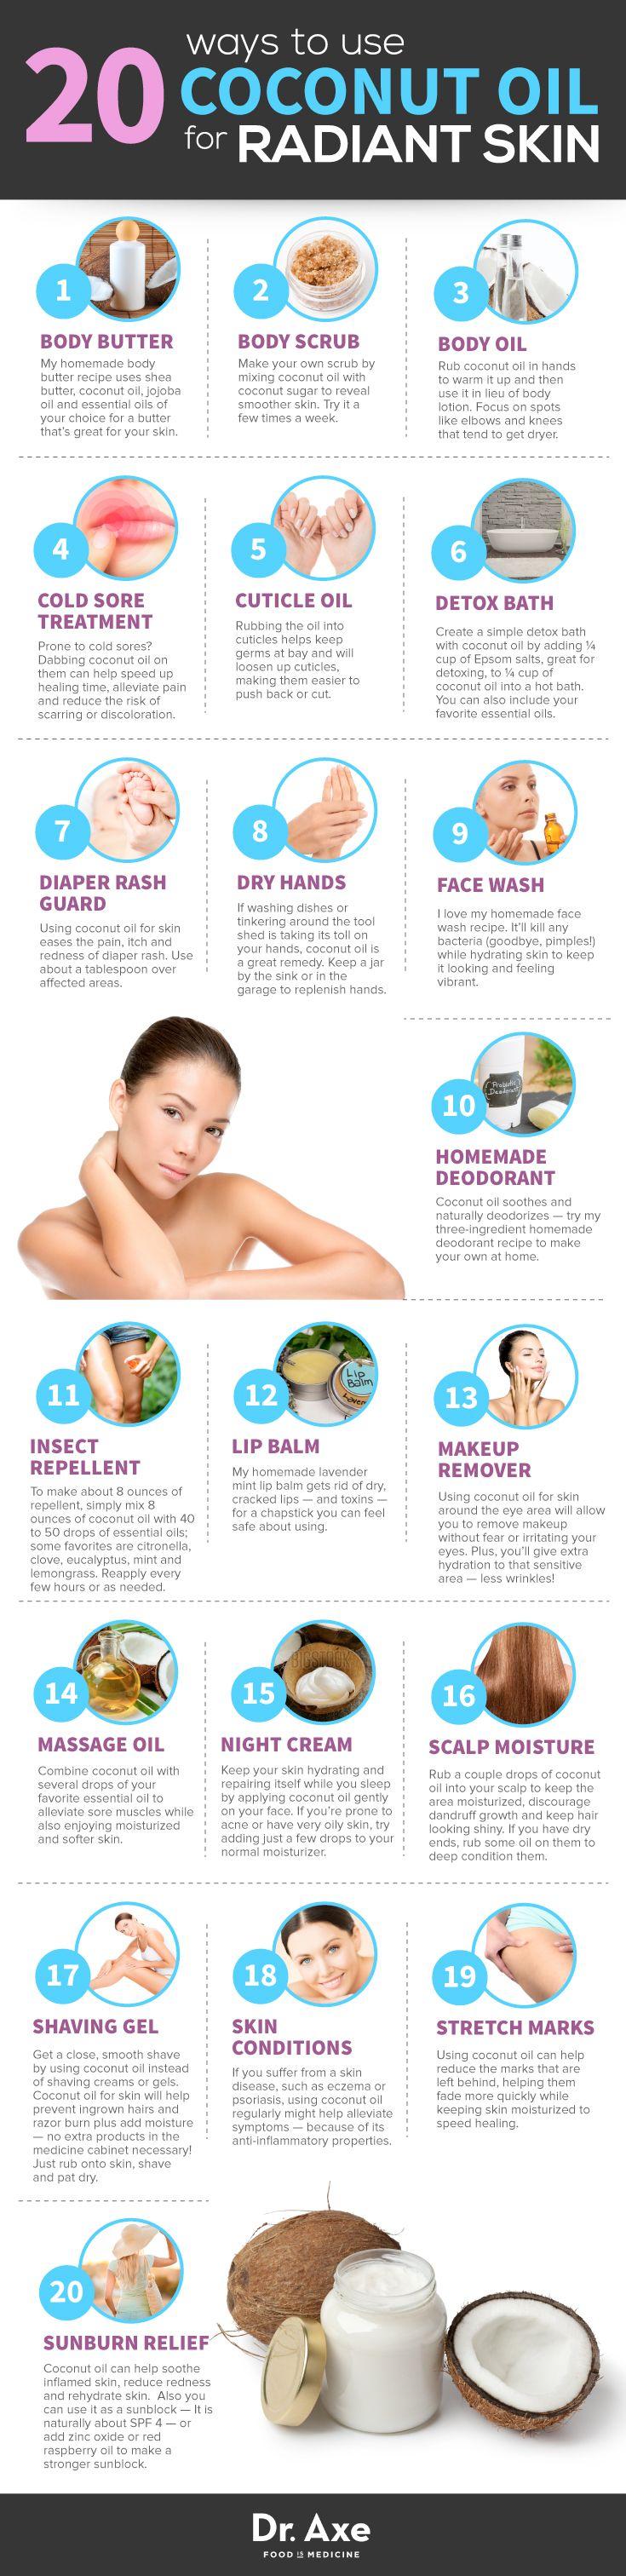 Wedding - 20 Secret Ways To Use Coconut Oil For Skin - Dr. Axe